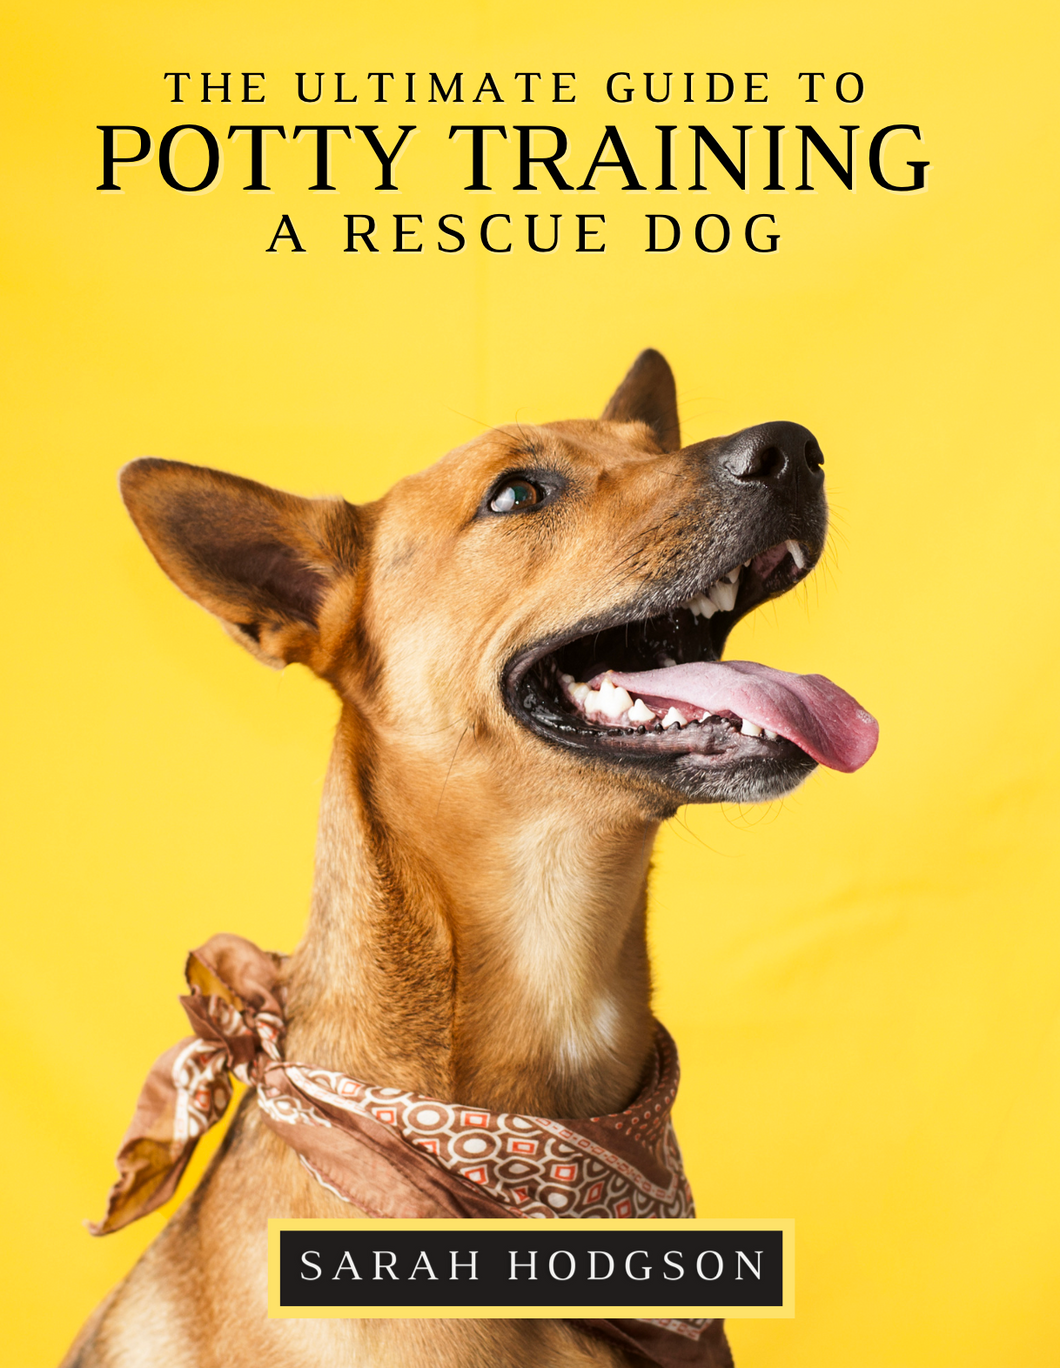 The Ultimate Guide to Potty Training a Rescue Dog Ebook